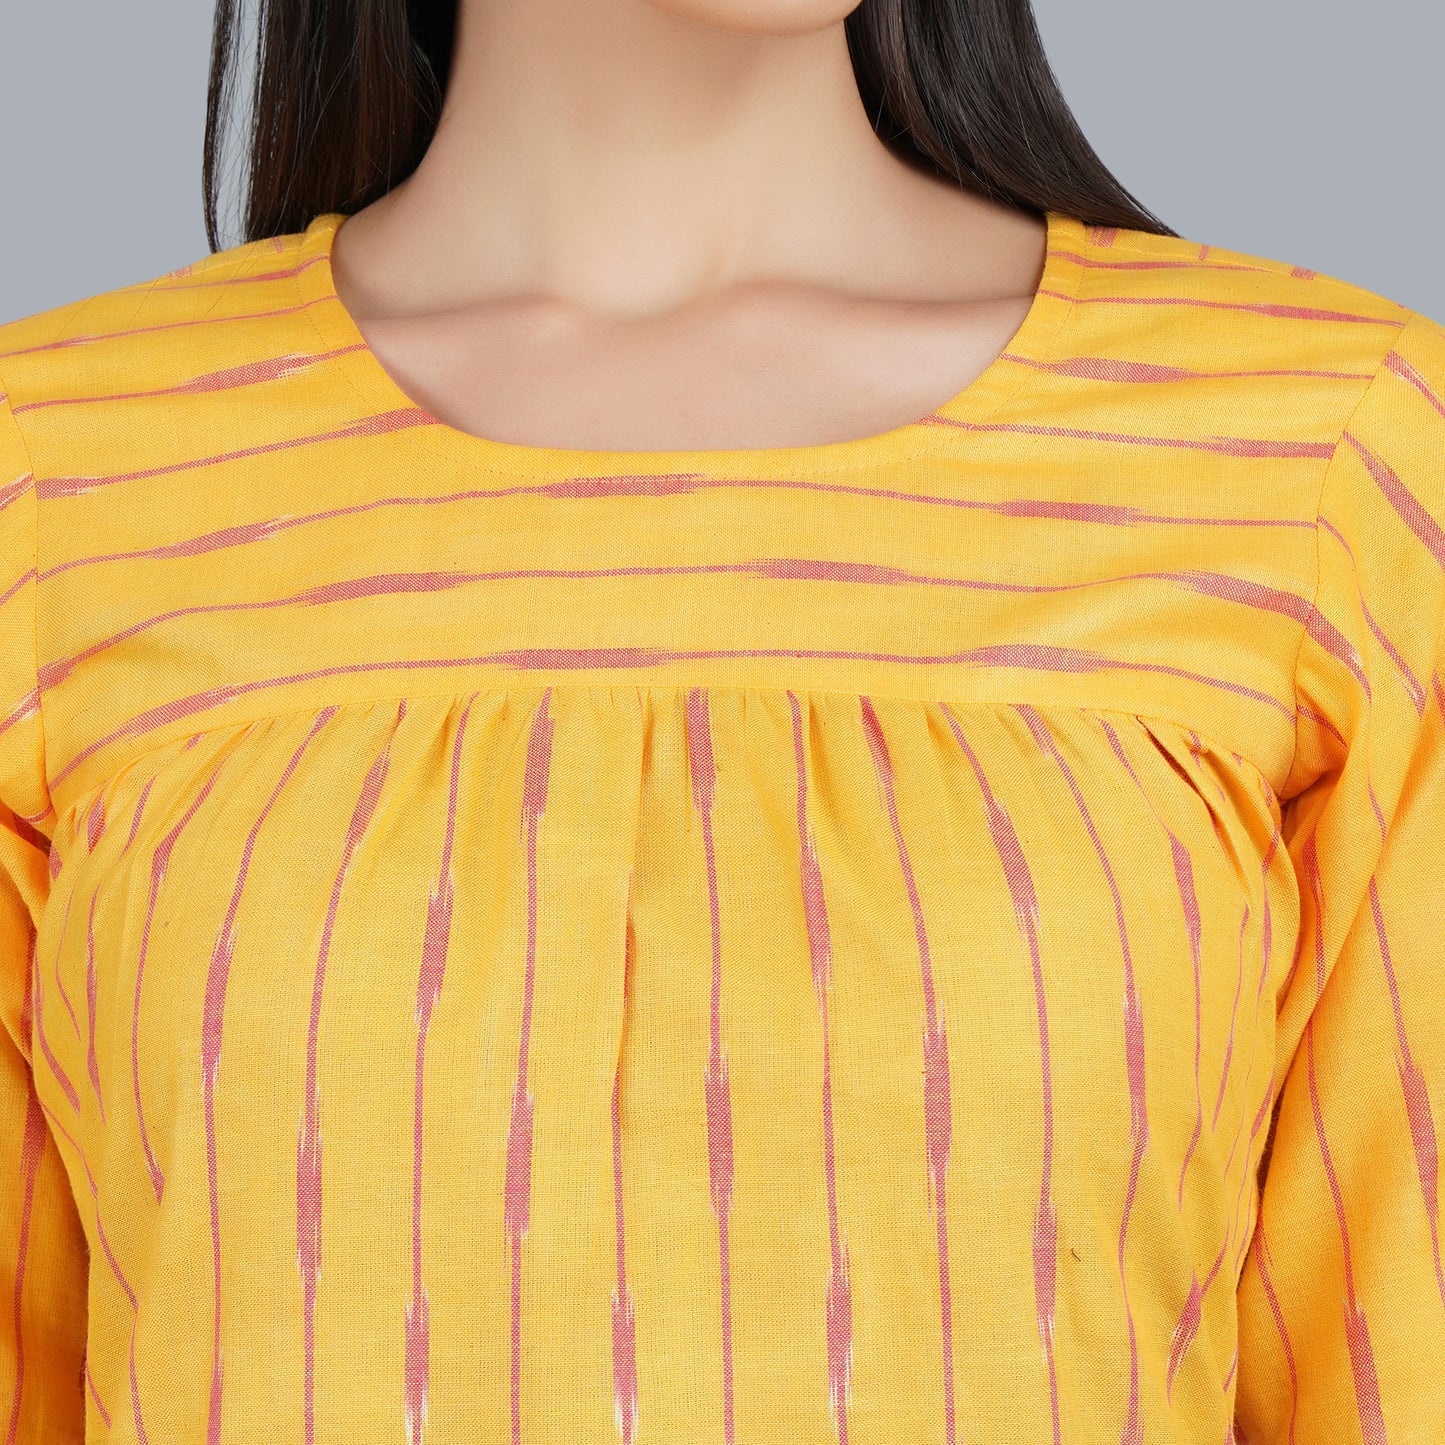 Yellow top for women